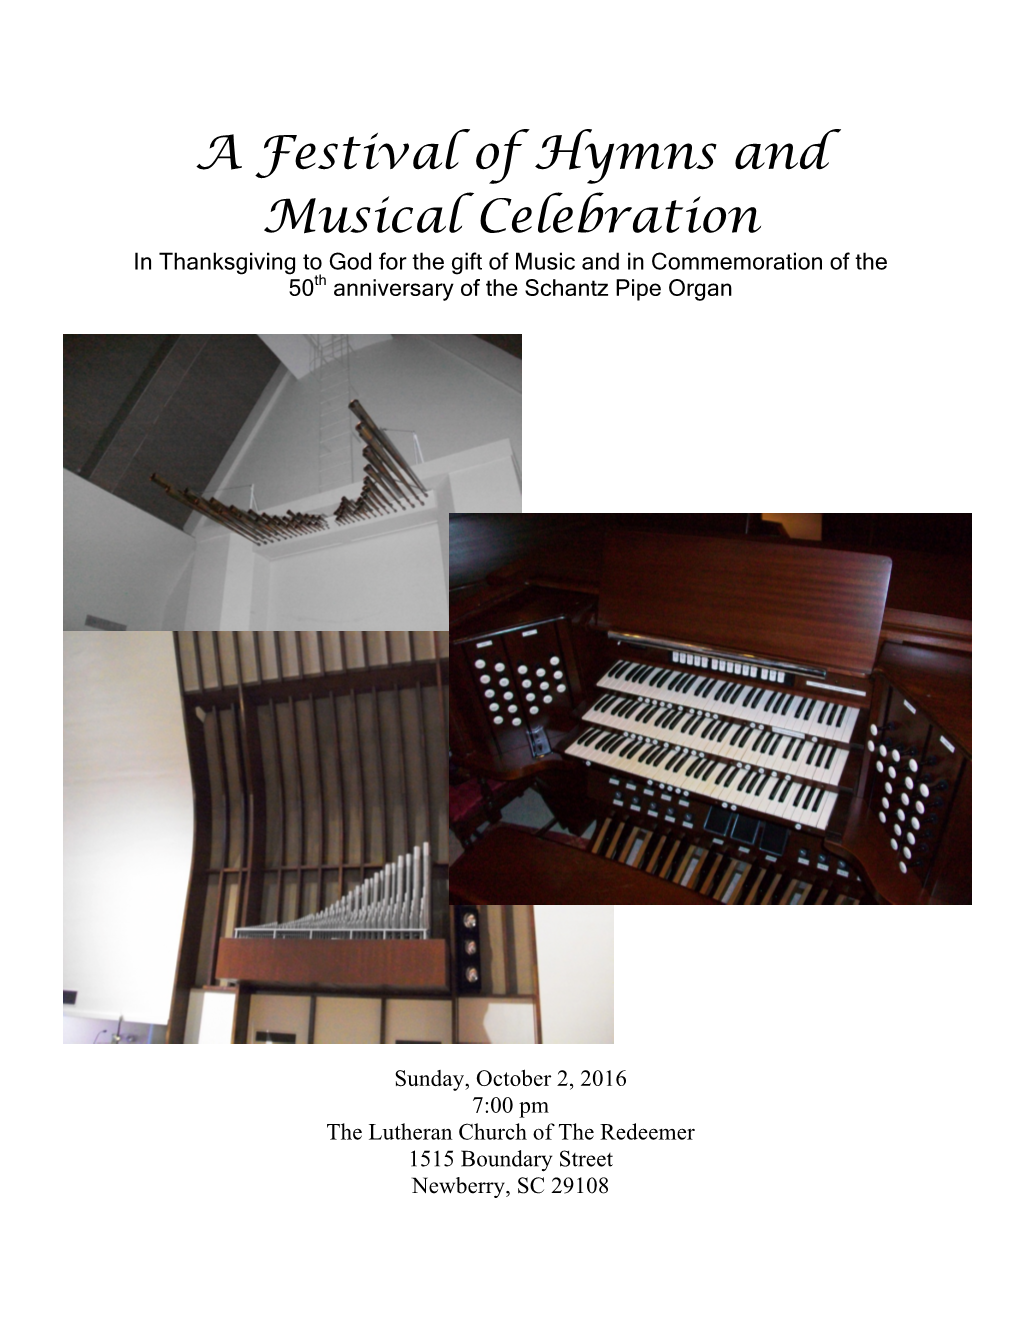 A Festival of Hymns and Musical Celebration in Thanksgiving to God for the Gift of Music and in Commemoration of the 50Th Anniversary of the Schantz Pipe Organ